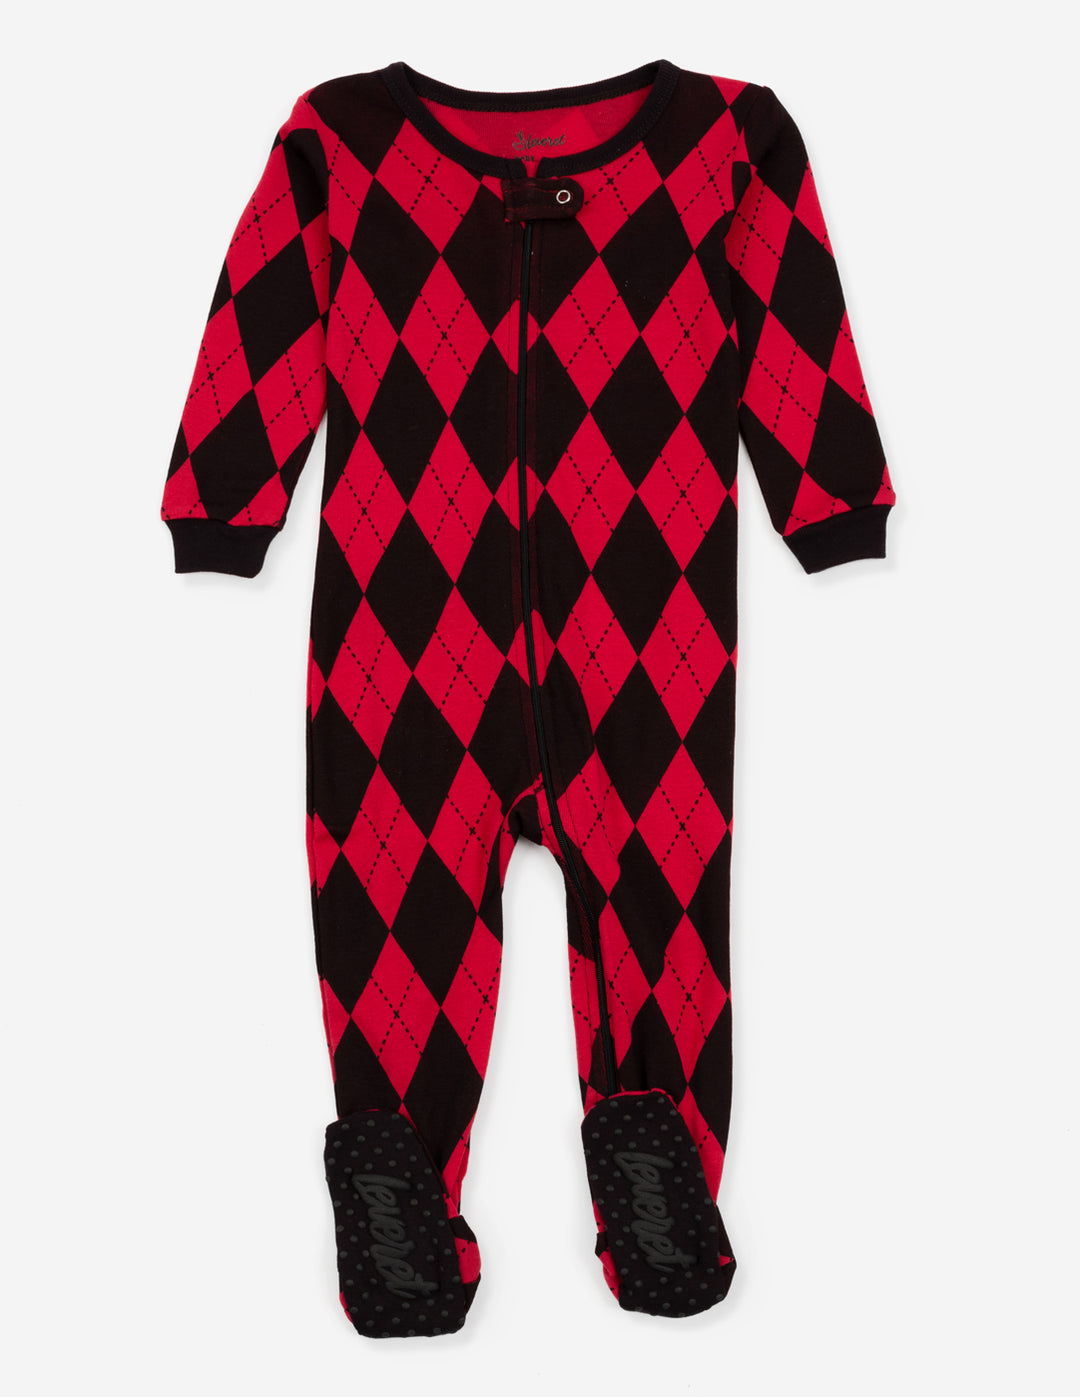 red and black argyle baby footed pajamas